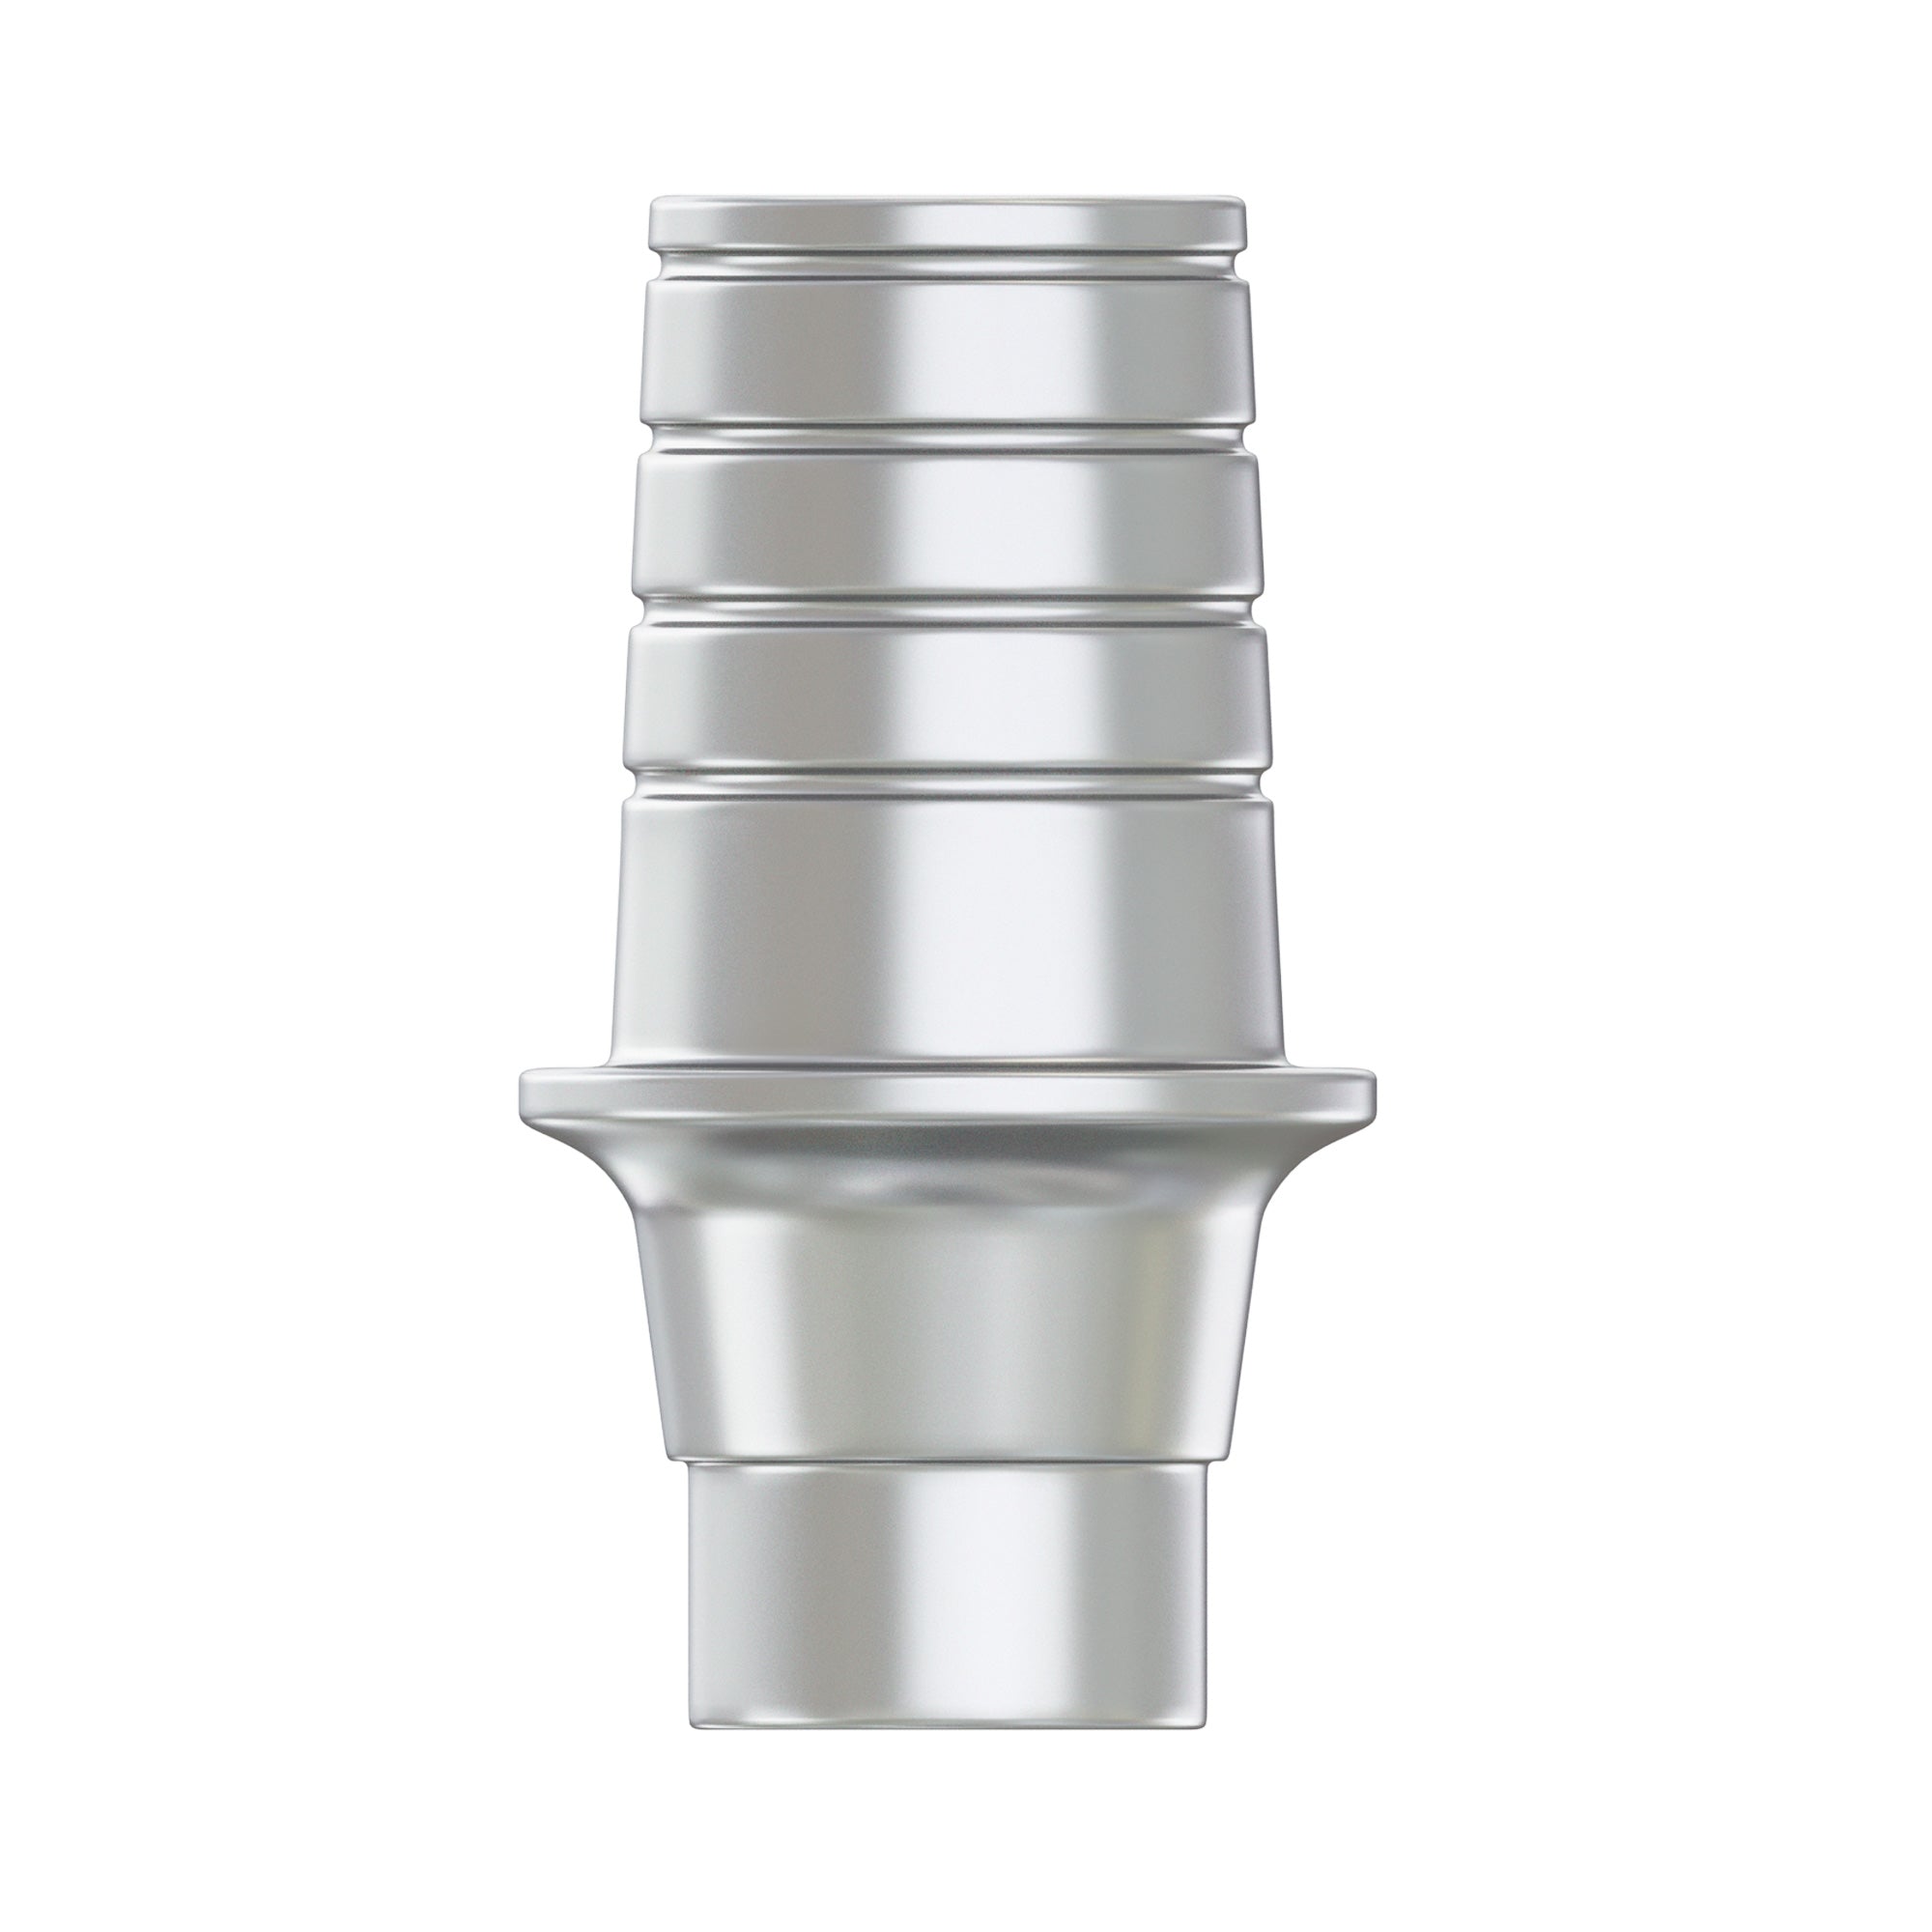 DSI Ti-Base CAD/CAM Abutment - 3.6mm - Conical Connection RP Ø4.3-5.0mm